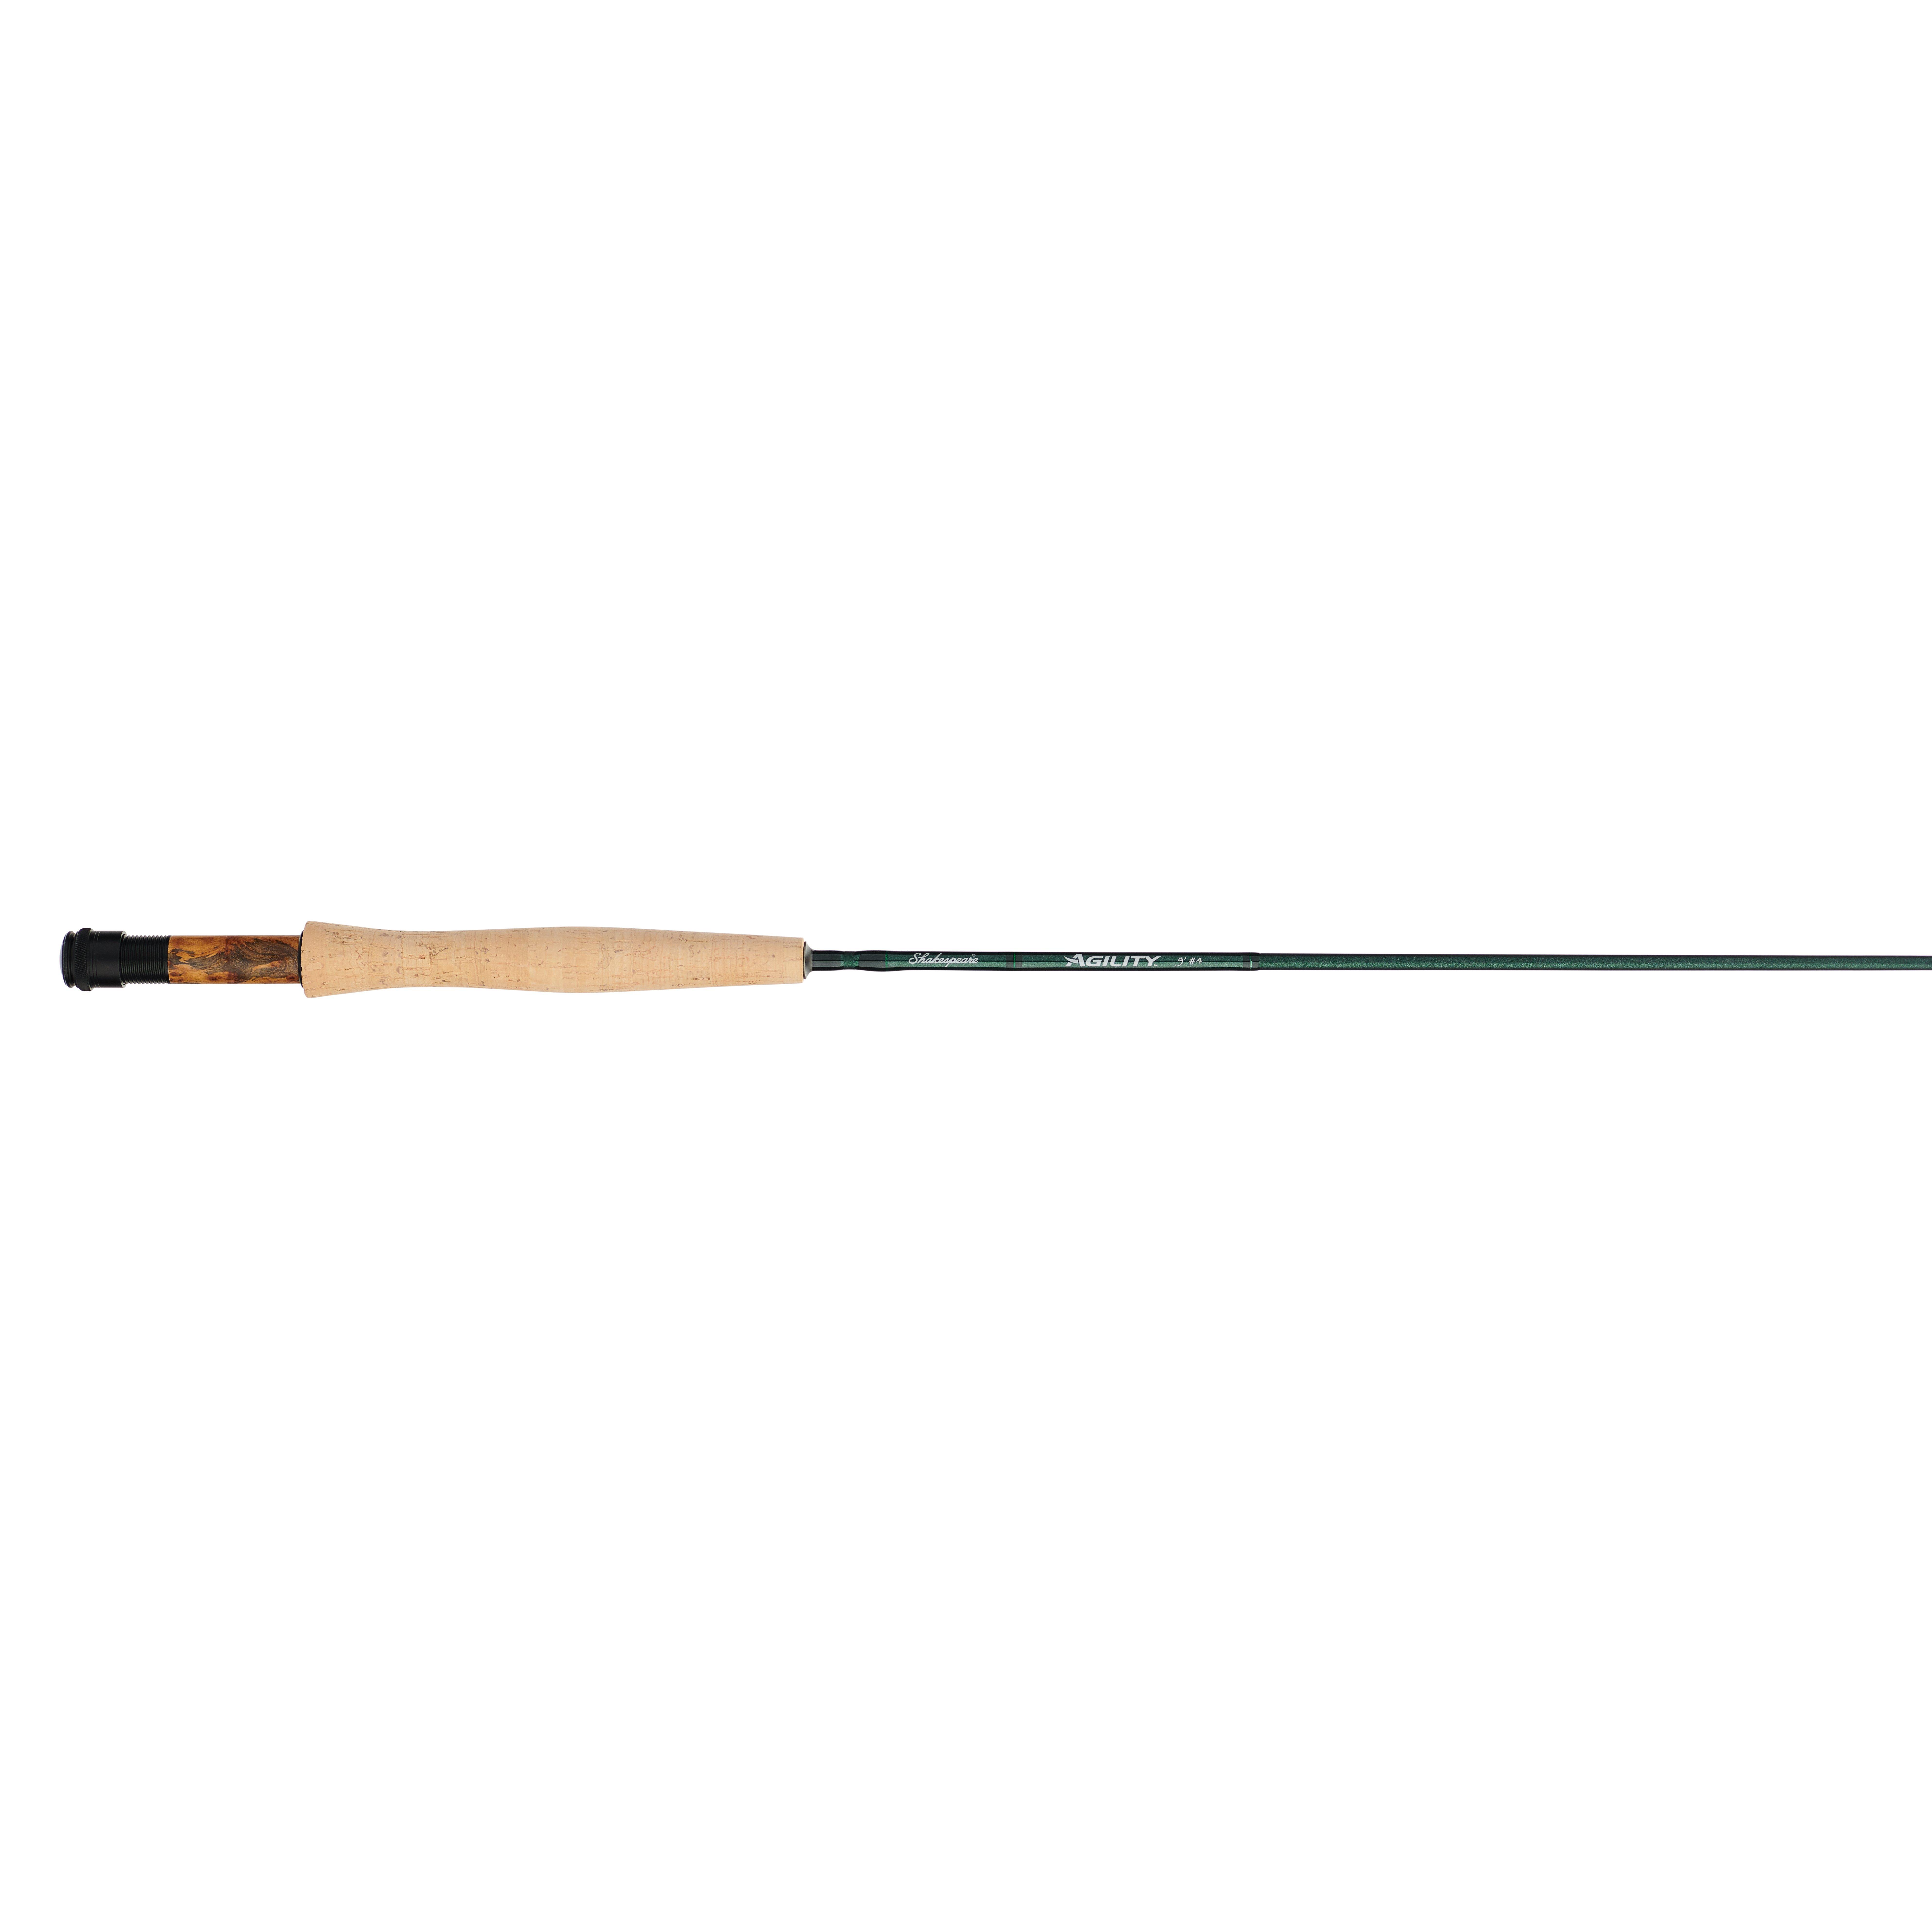 Shakespeare Agility 2 Travel Spin Rod 8’ 10-25g 